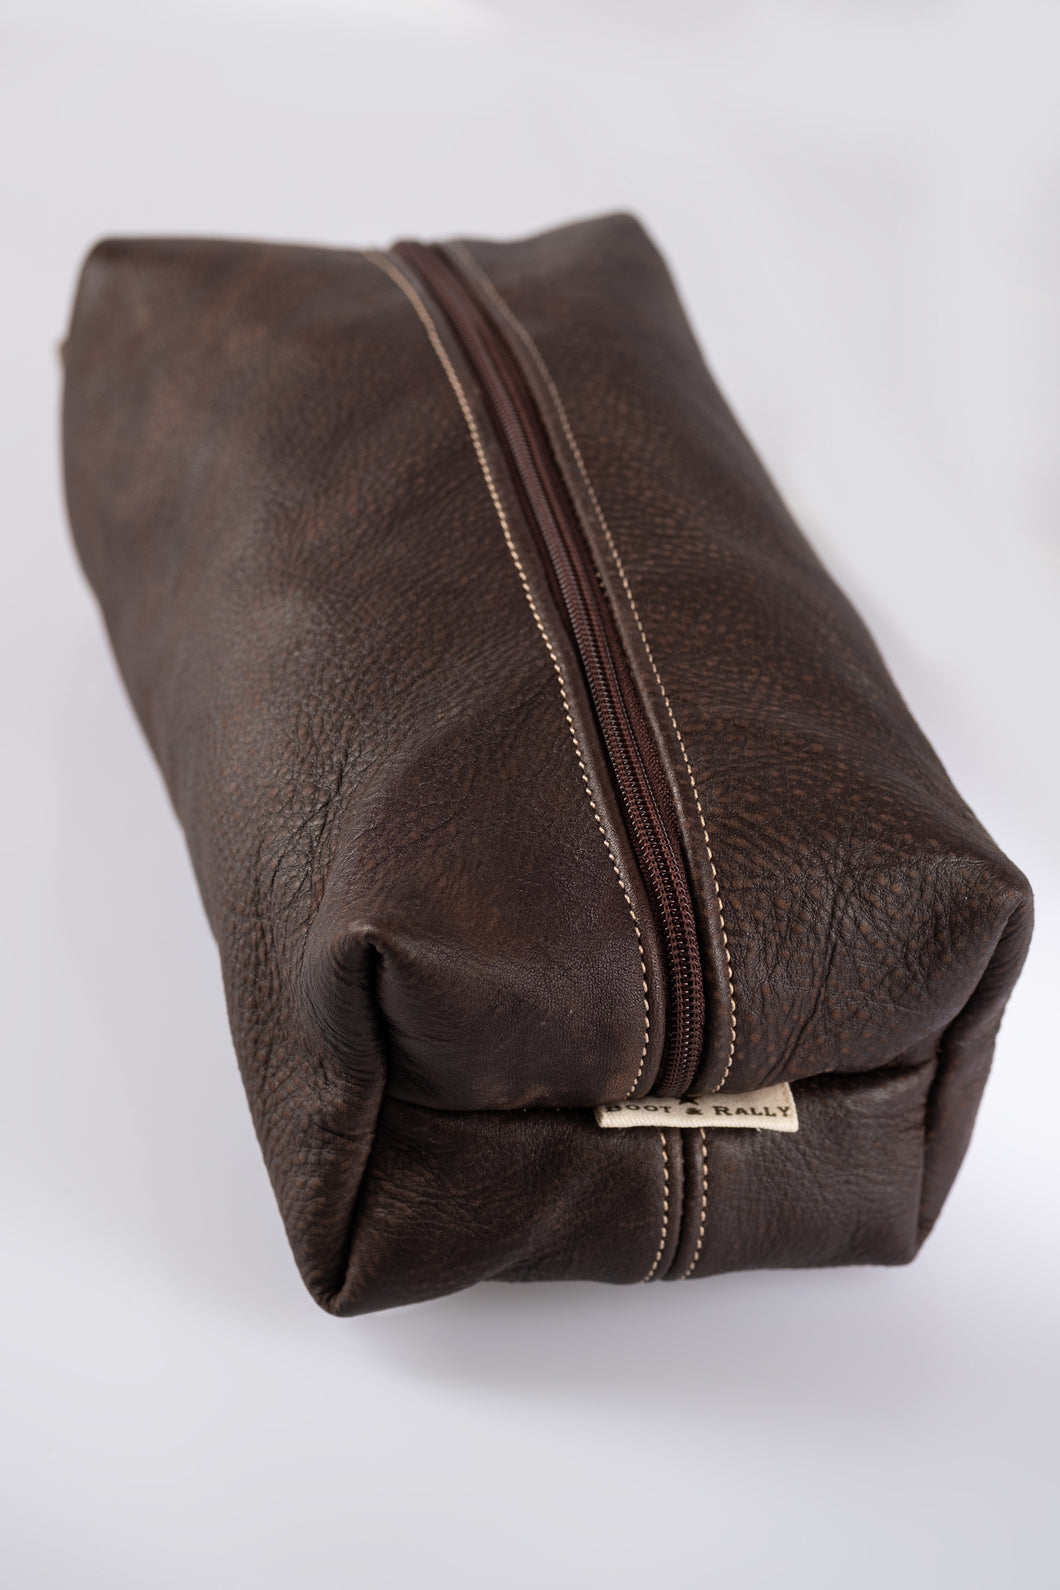 Toiletry bag- Full leather (Buffed Brown)